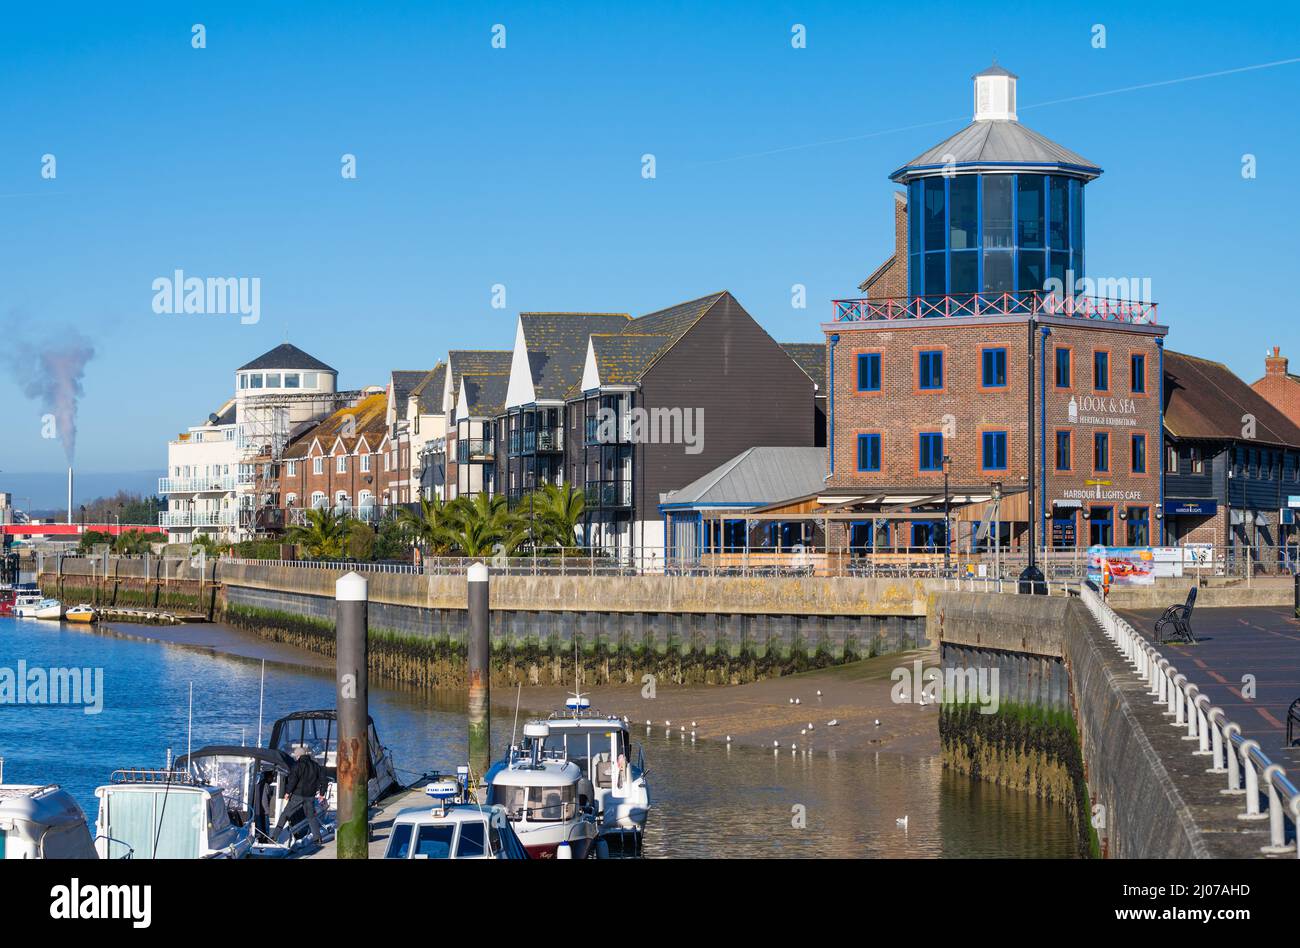 View of riverside housing and Look & Sea visitor's centre with boats moored on a pontoon alongside the River Arun in Littlehampton, West Sussex, UK. Stock Photo